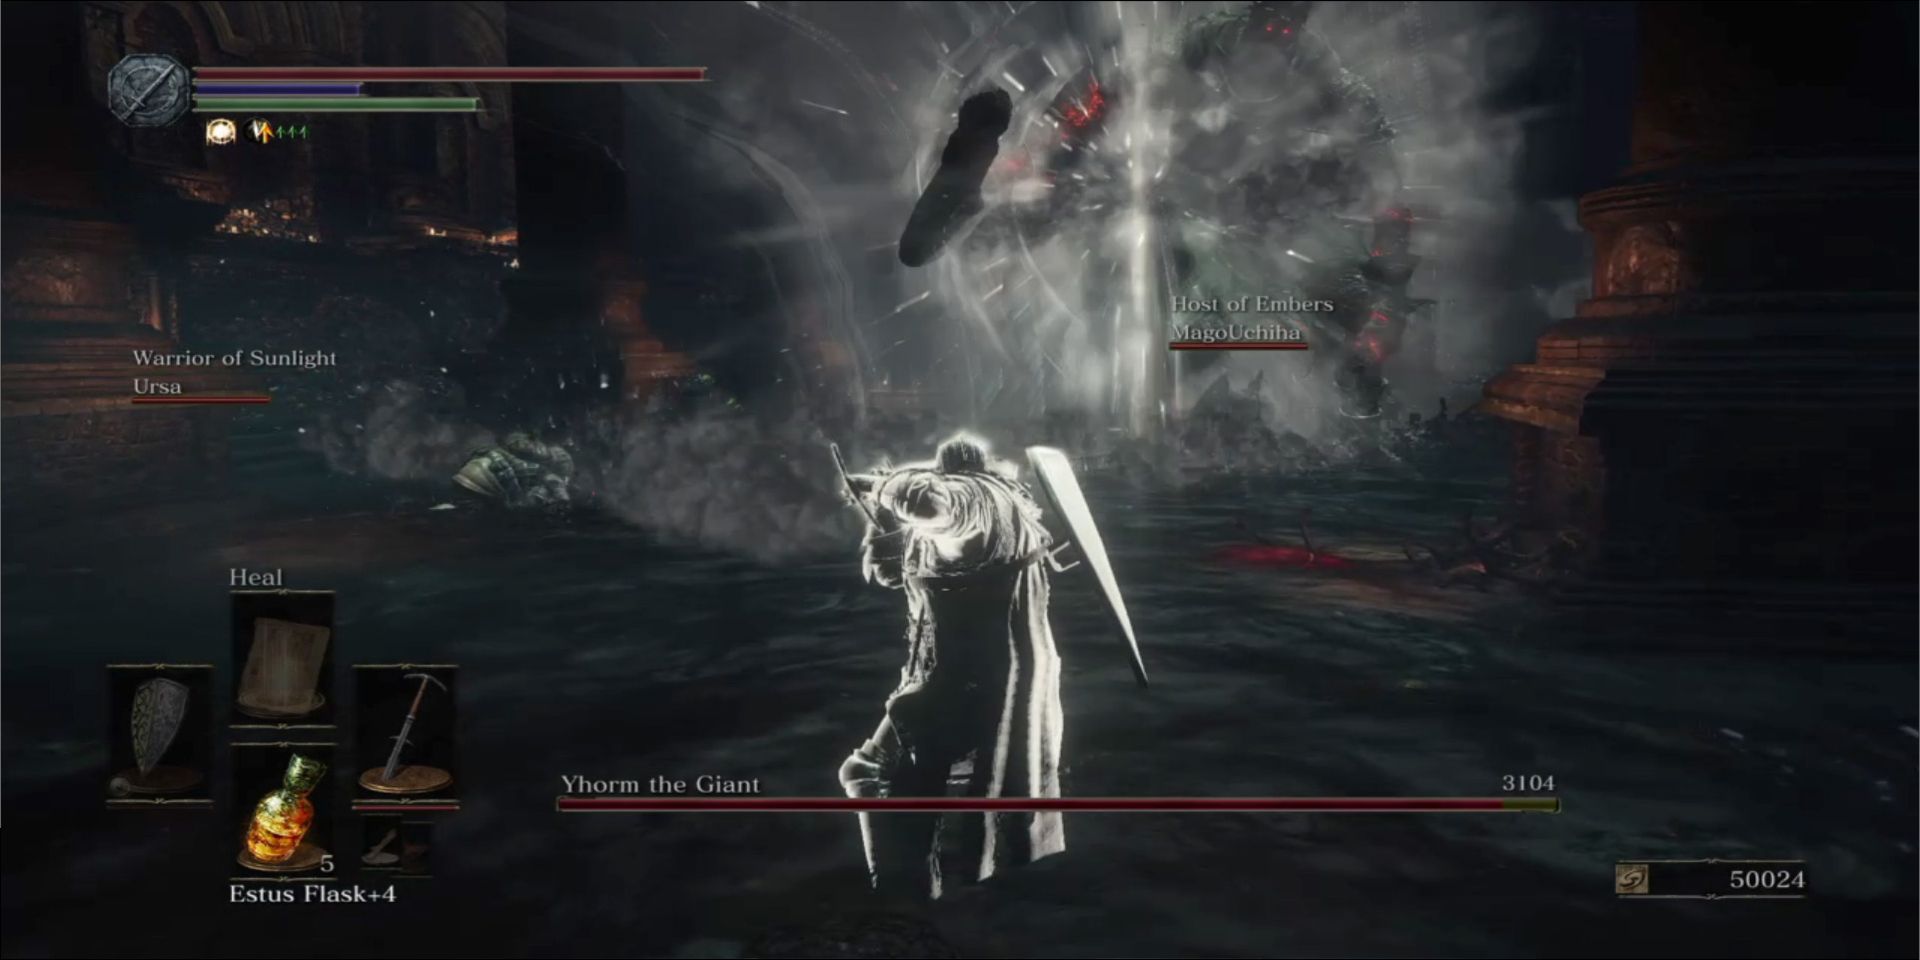 The boss battle against Yhorm the Giant in Dark Souls 3.